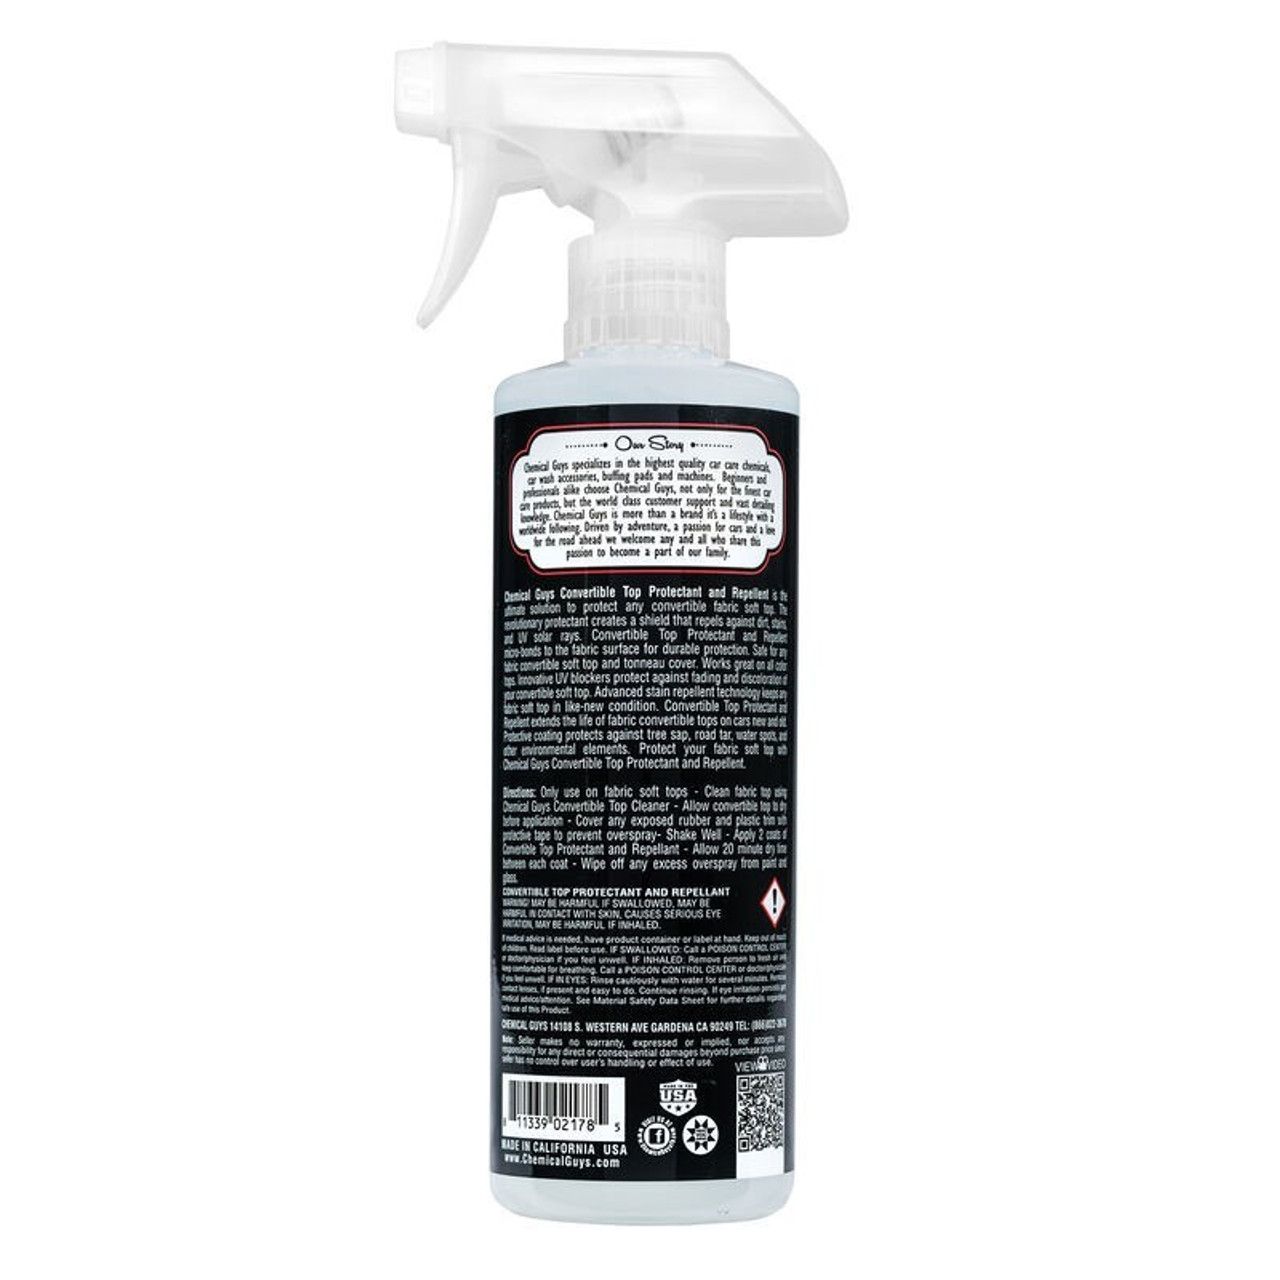 Chemical Guys Convertible Top Protectant & Repellent - 16oz - Label